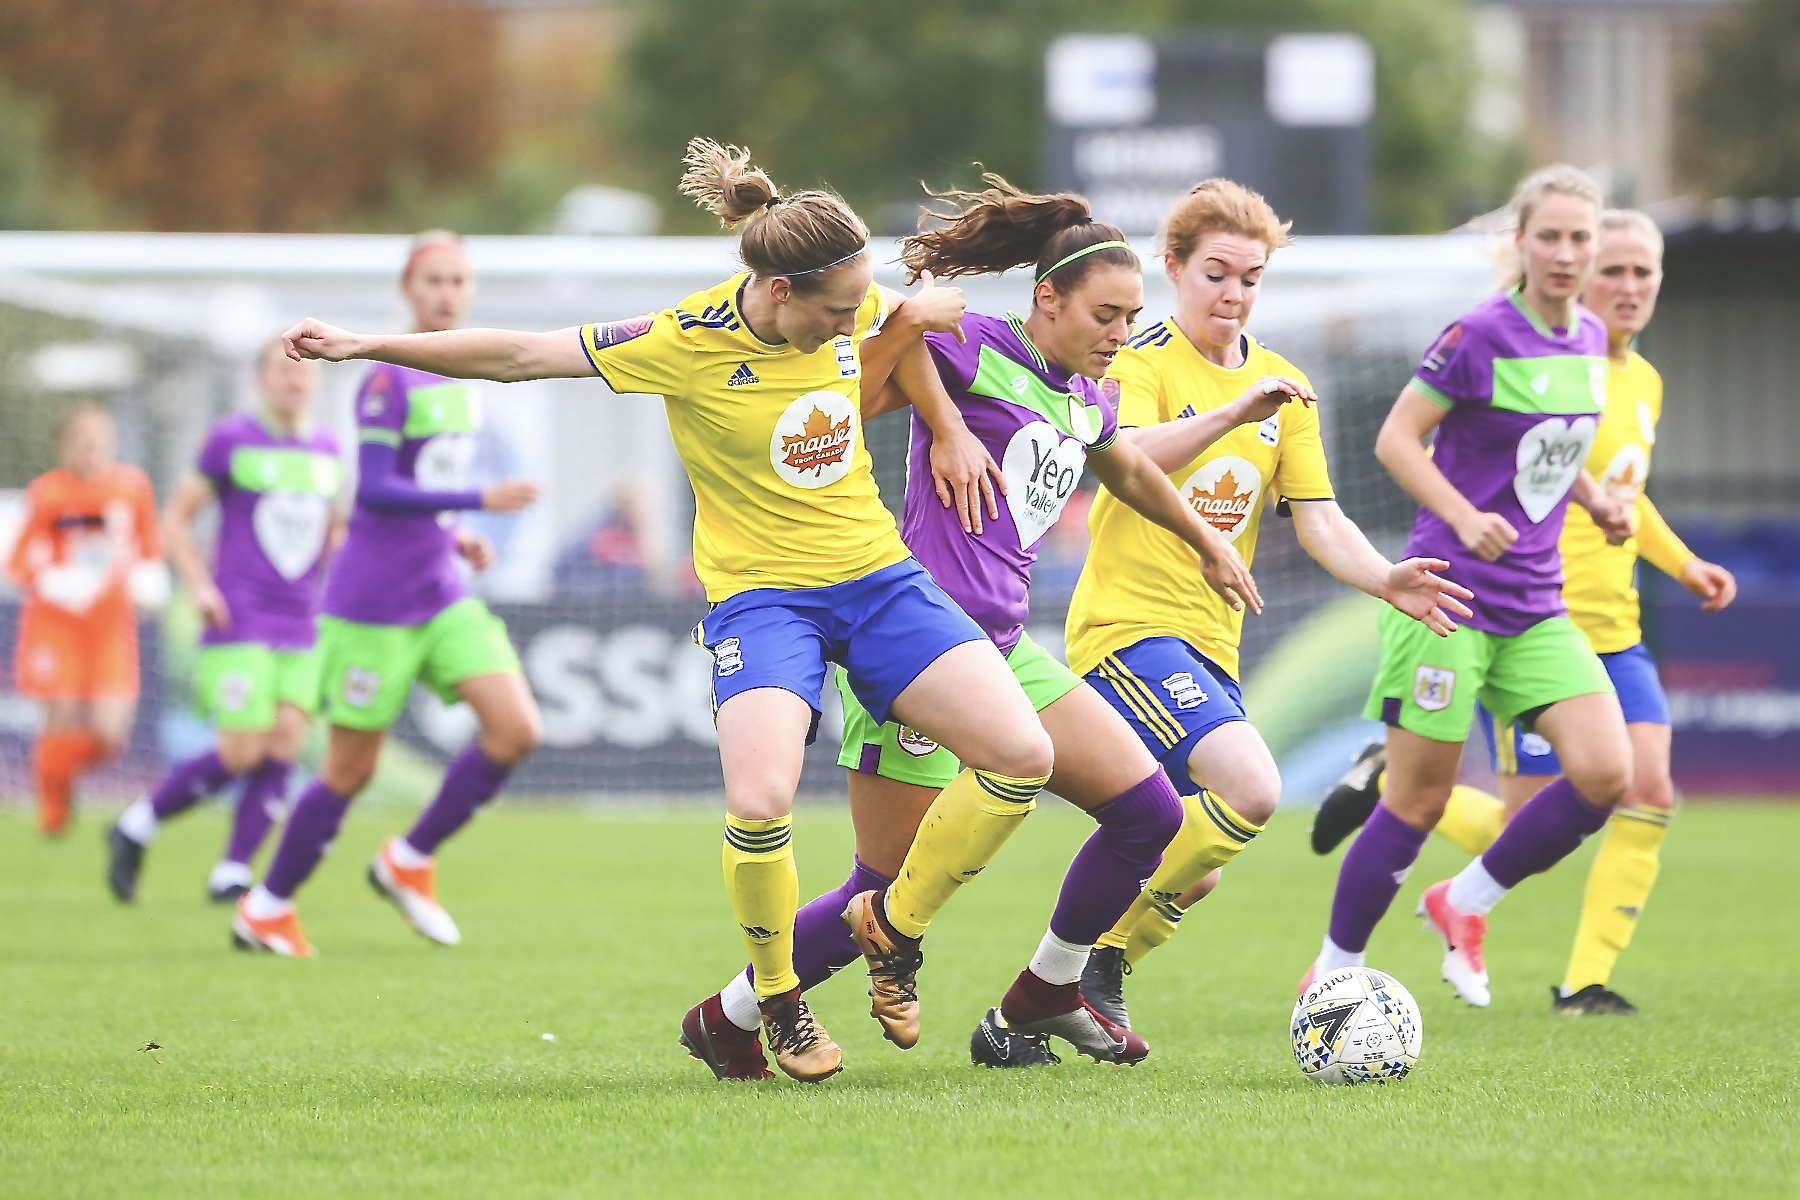 Ellie Rutherford and Aoife Mannion for Bristol City Women against Birmingham City Women